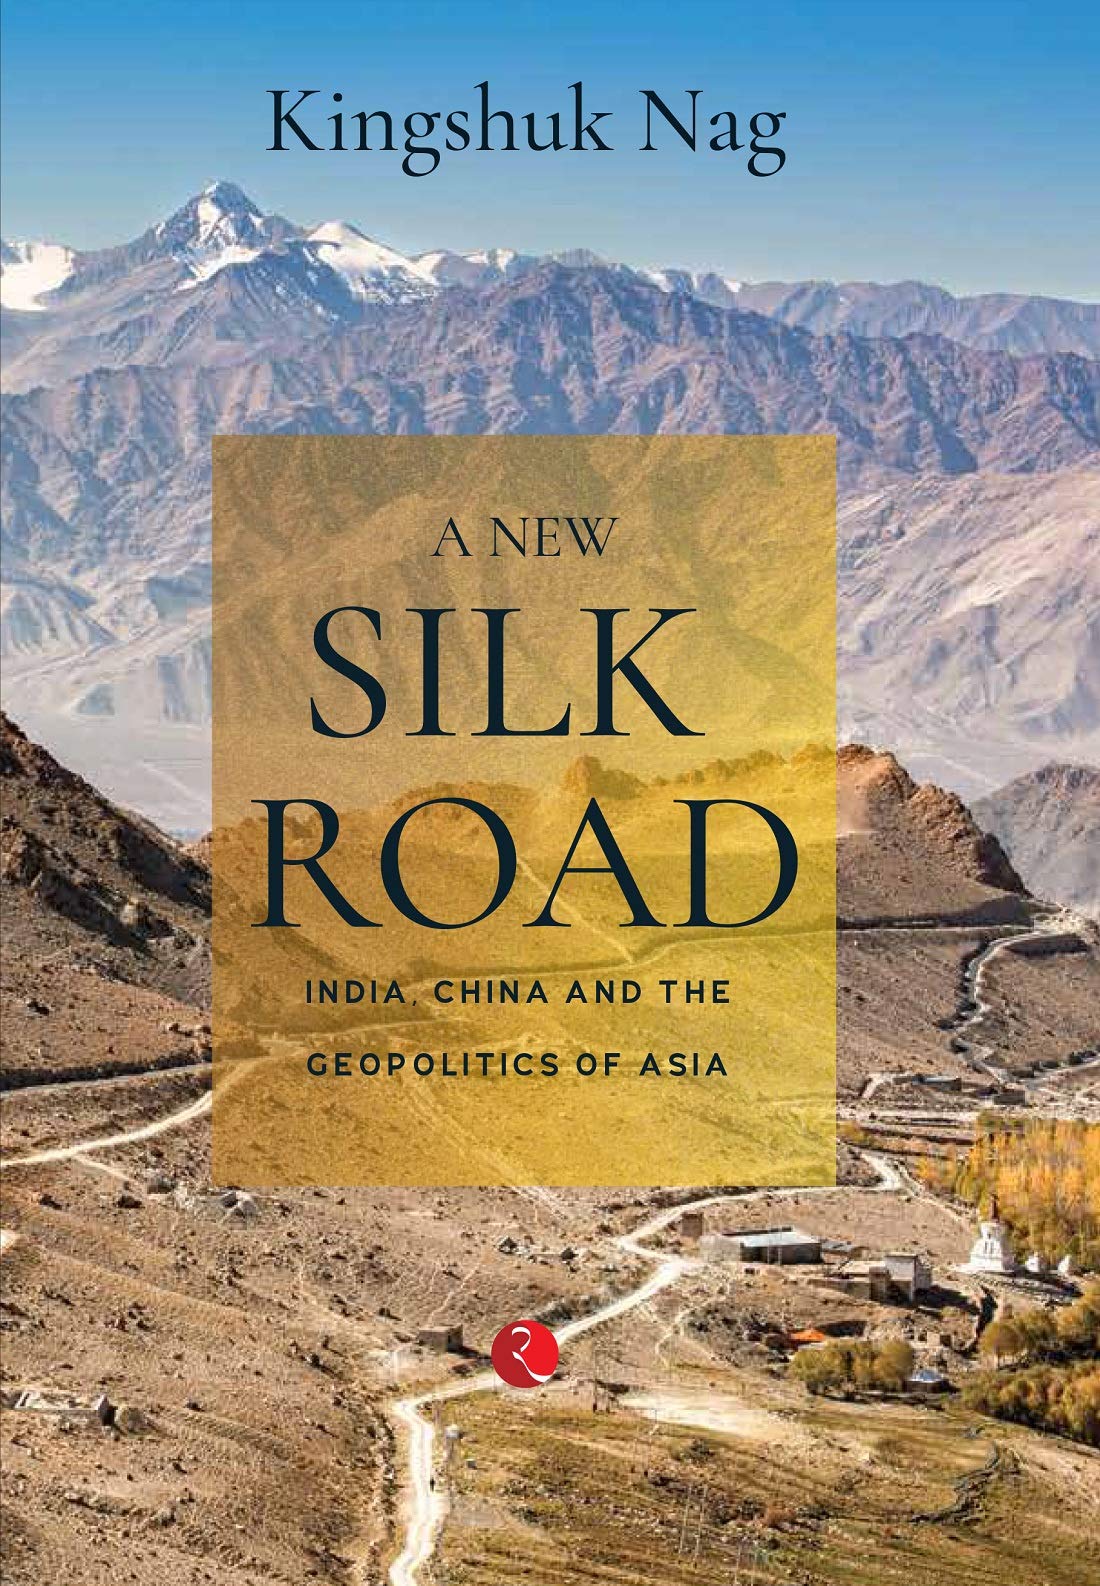 A NEW SILK ROAD, INDIA CHINA AND THE GEOGRAPHICS